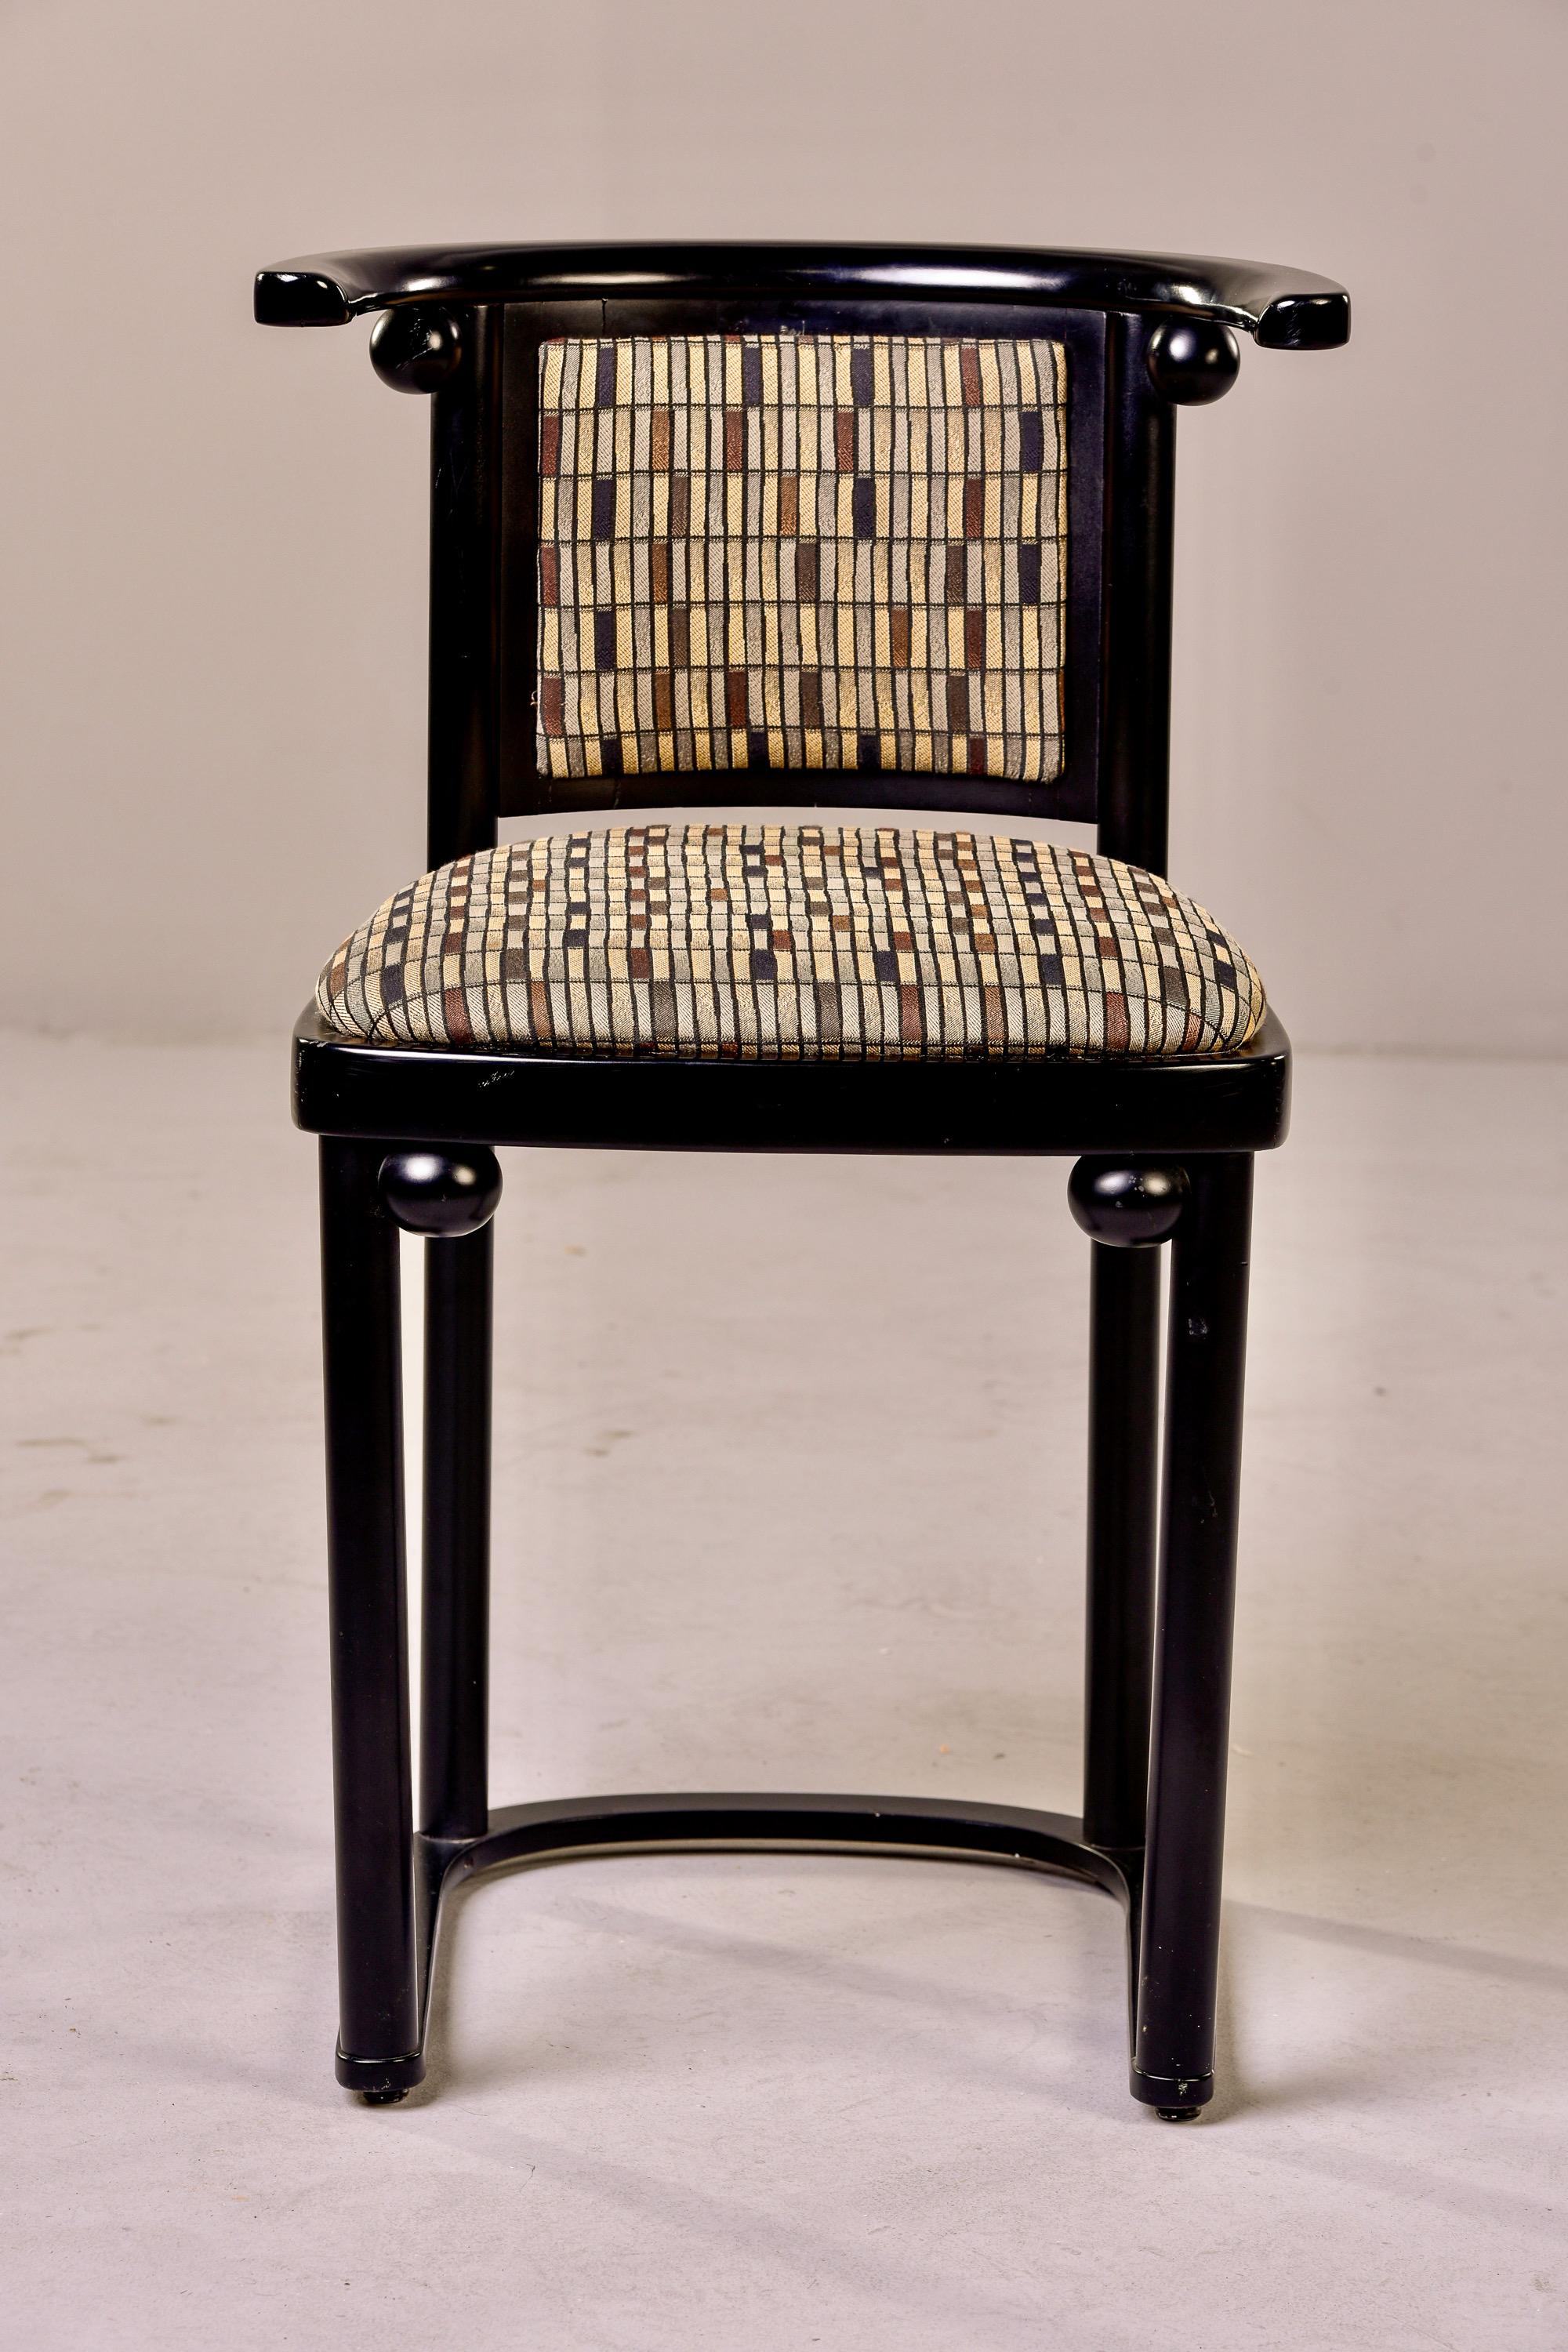 Designed in 1907 by Josef Hoffmann for the bar at the Fledermaus cabaret in Vienna. Black finished beech frame with the icornic curved back and decorative spheres. This chair dates from the mid 20th century and is attributed to Wittmann, but there